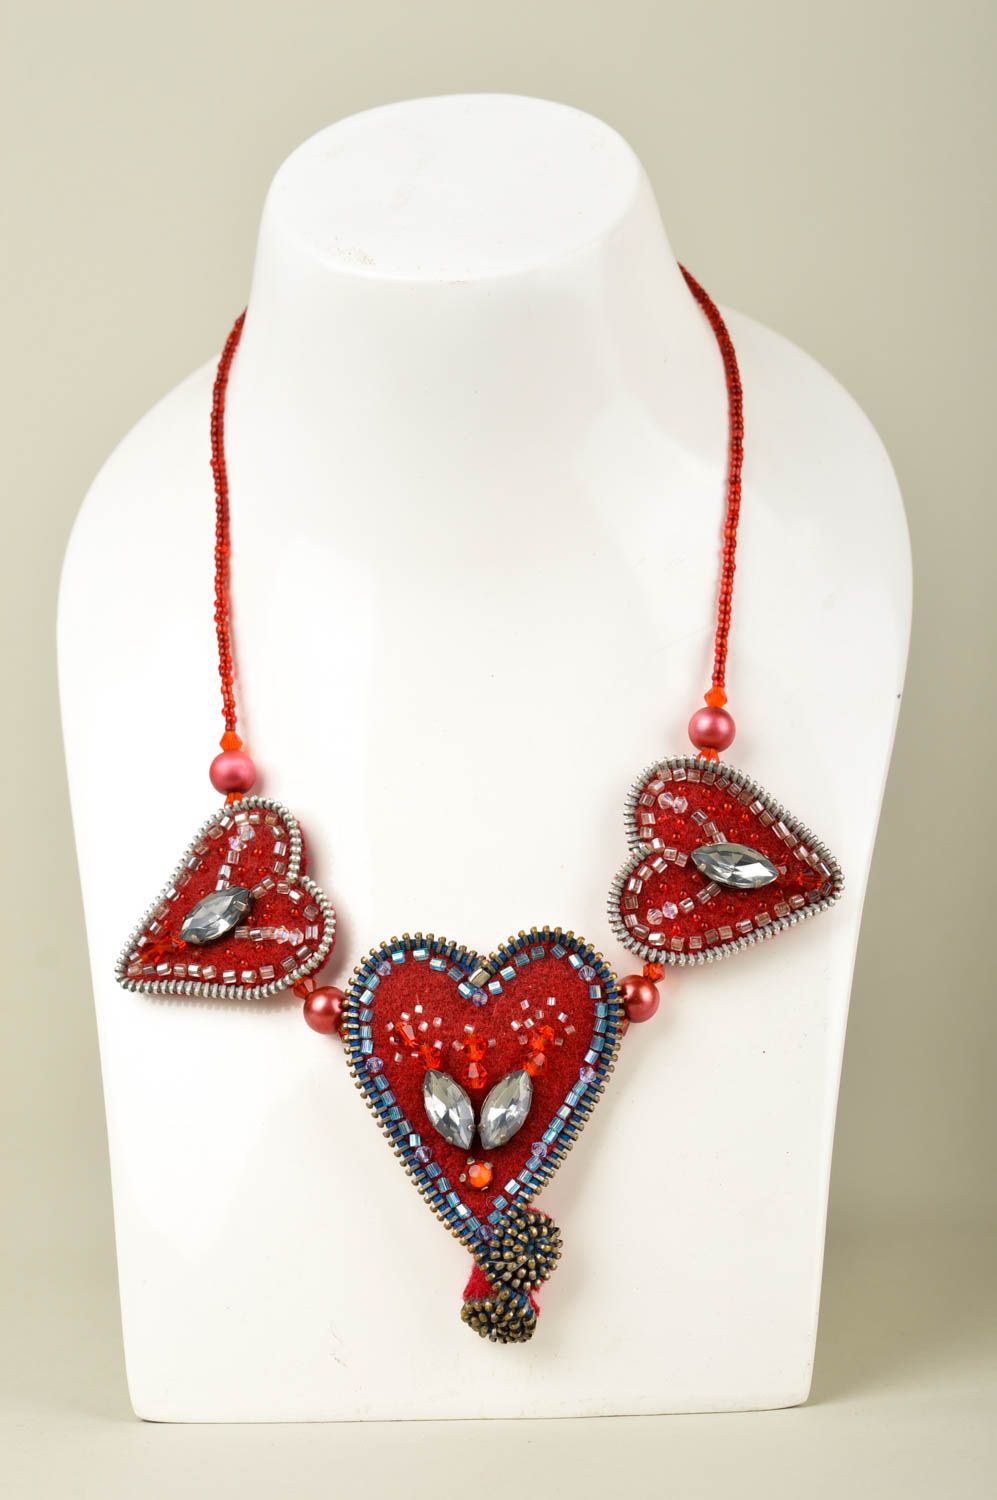 Unusual handmade beaded necklace costume jewelry designs gifts for her photo 1